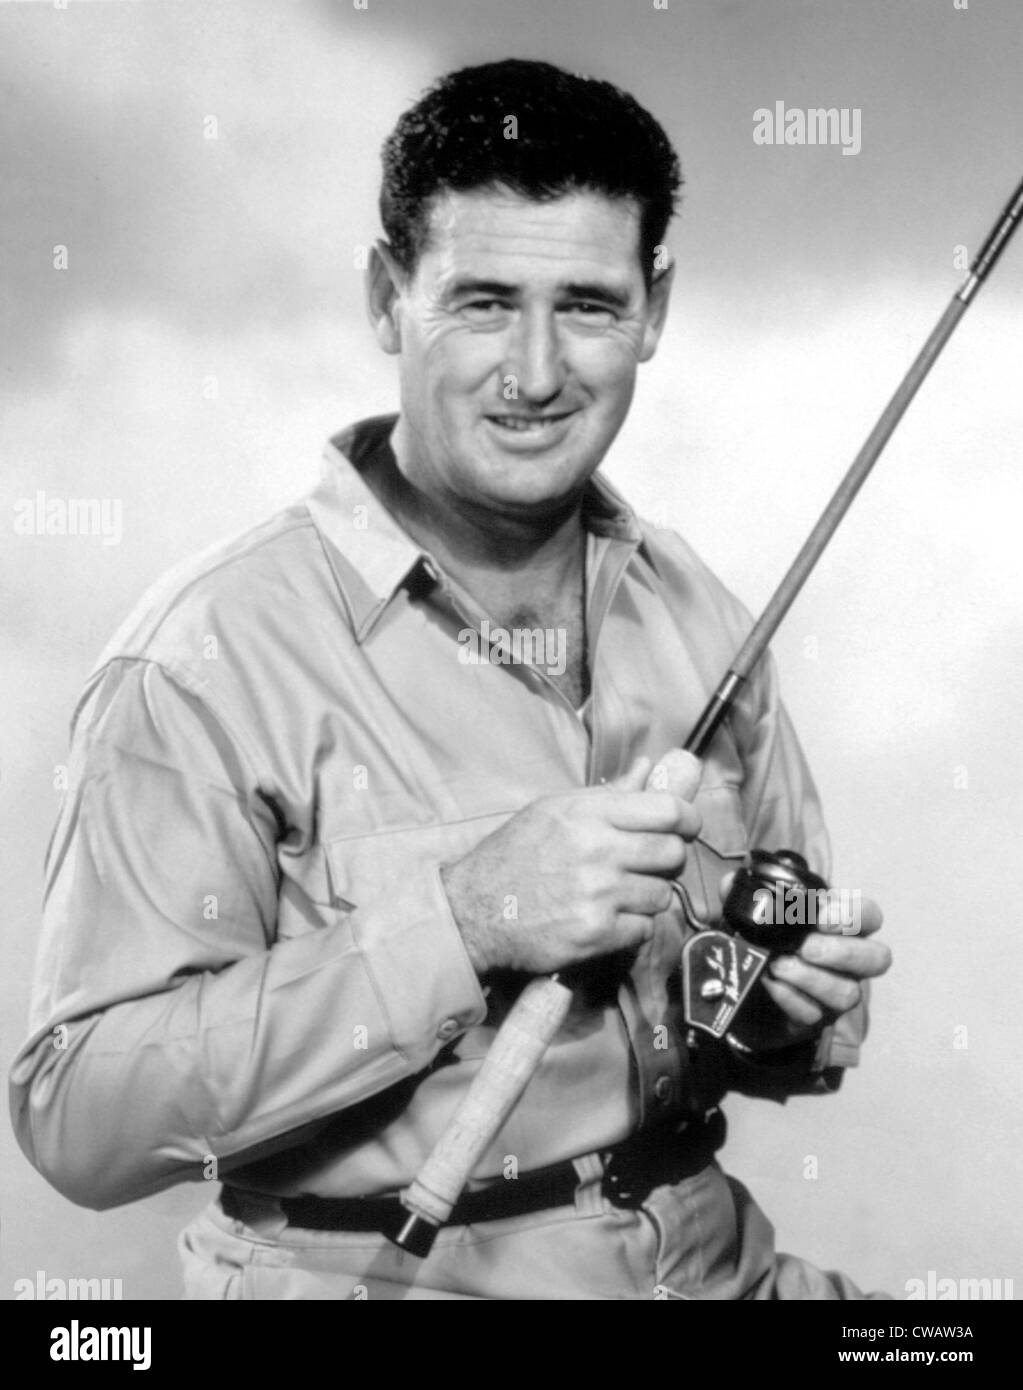 Ted Williams, with his Signature Fishing Gear, 1962. Courtesy: CSU Archives / Everett Collection Stock Photo